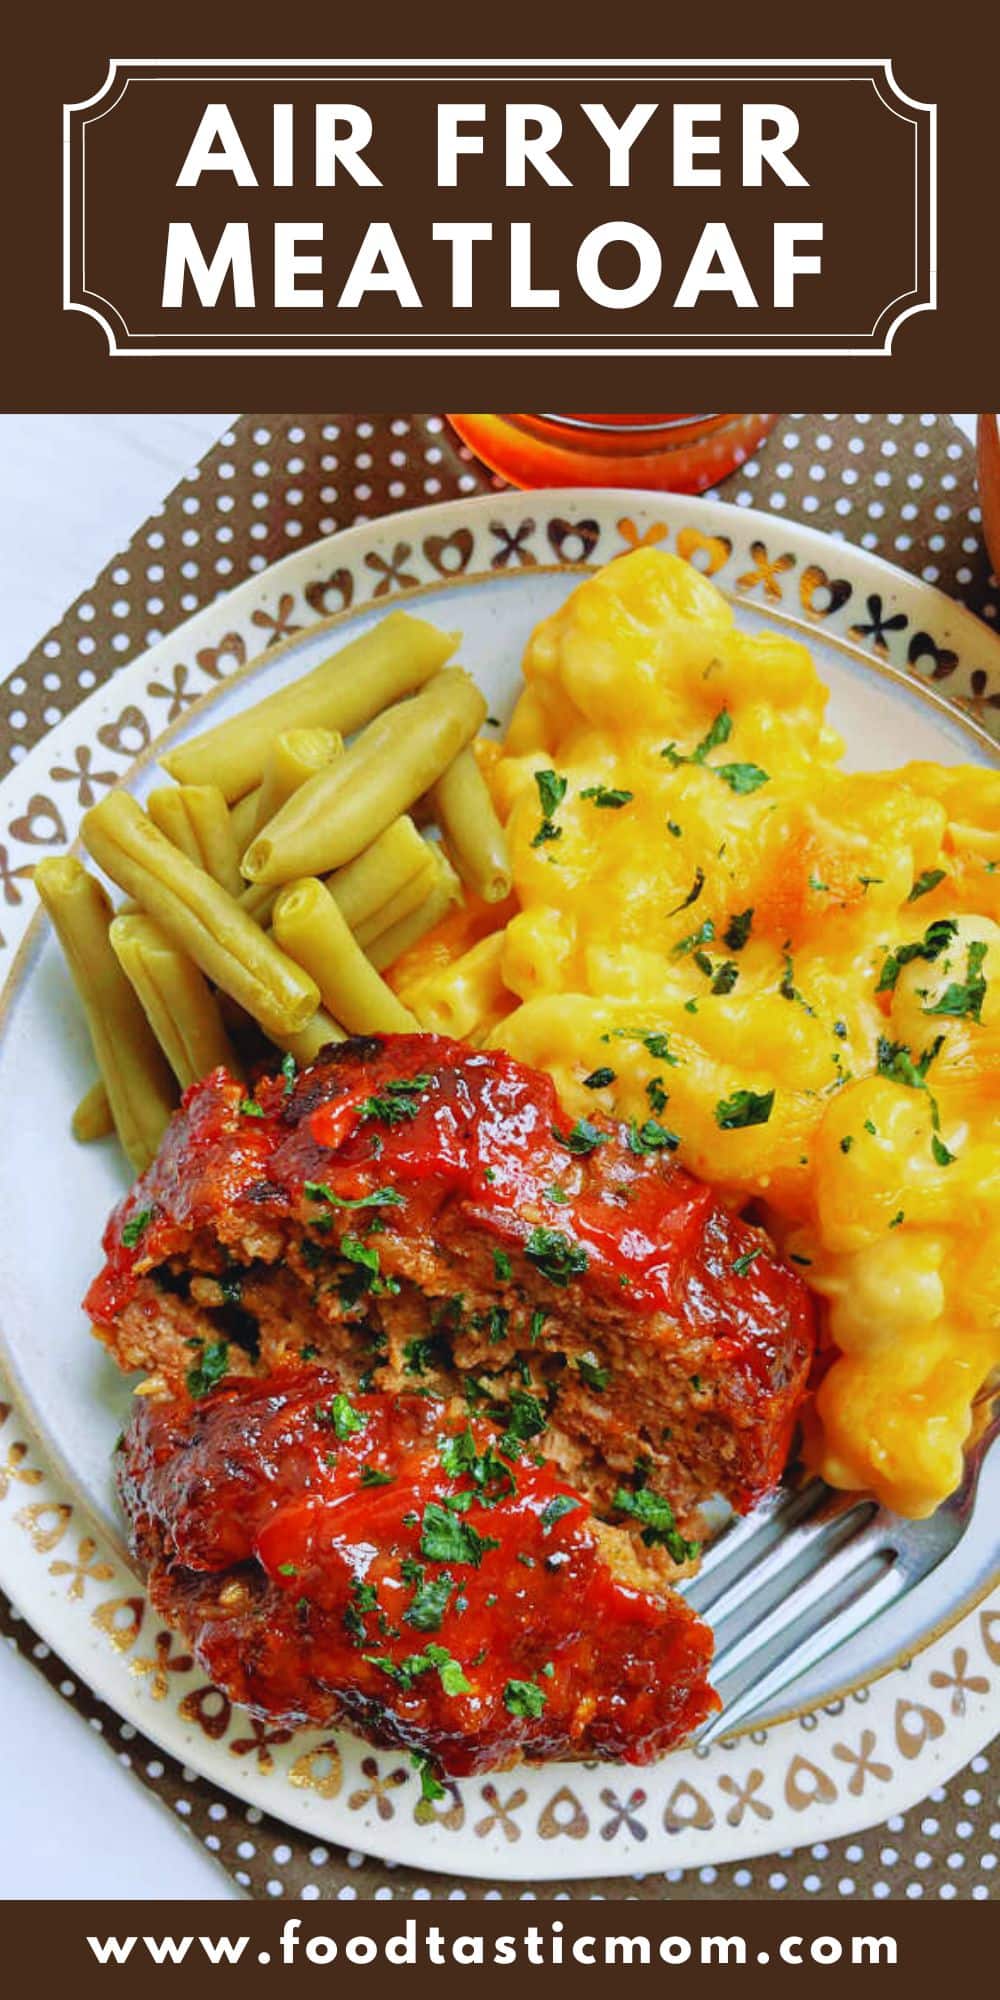 Forget baking it in the oven. Air Fryer Meatloaf is the tastiest and most tender meatloaf you can make. No stovetop cooking required. via @foodtasticmom